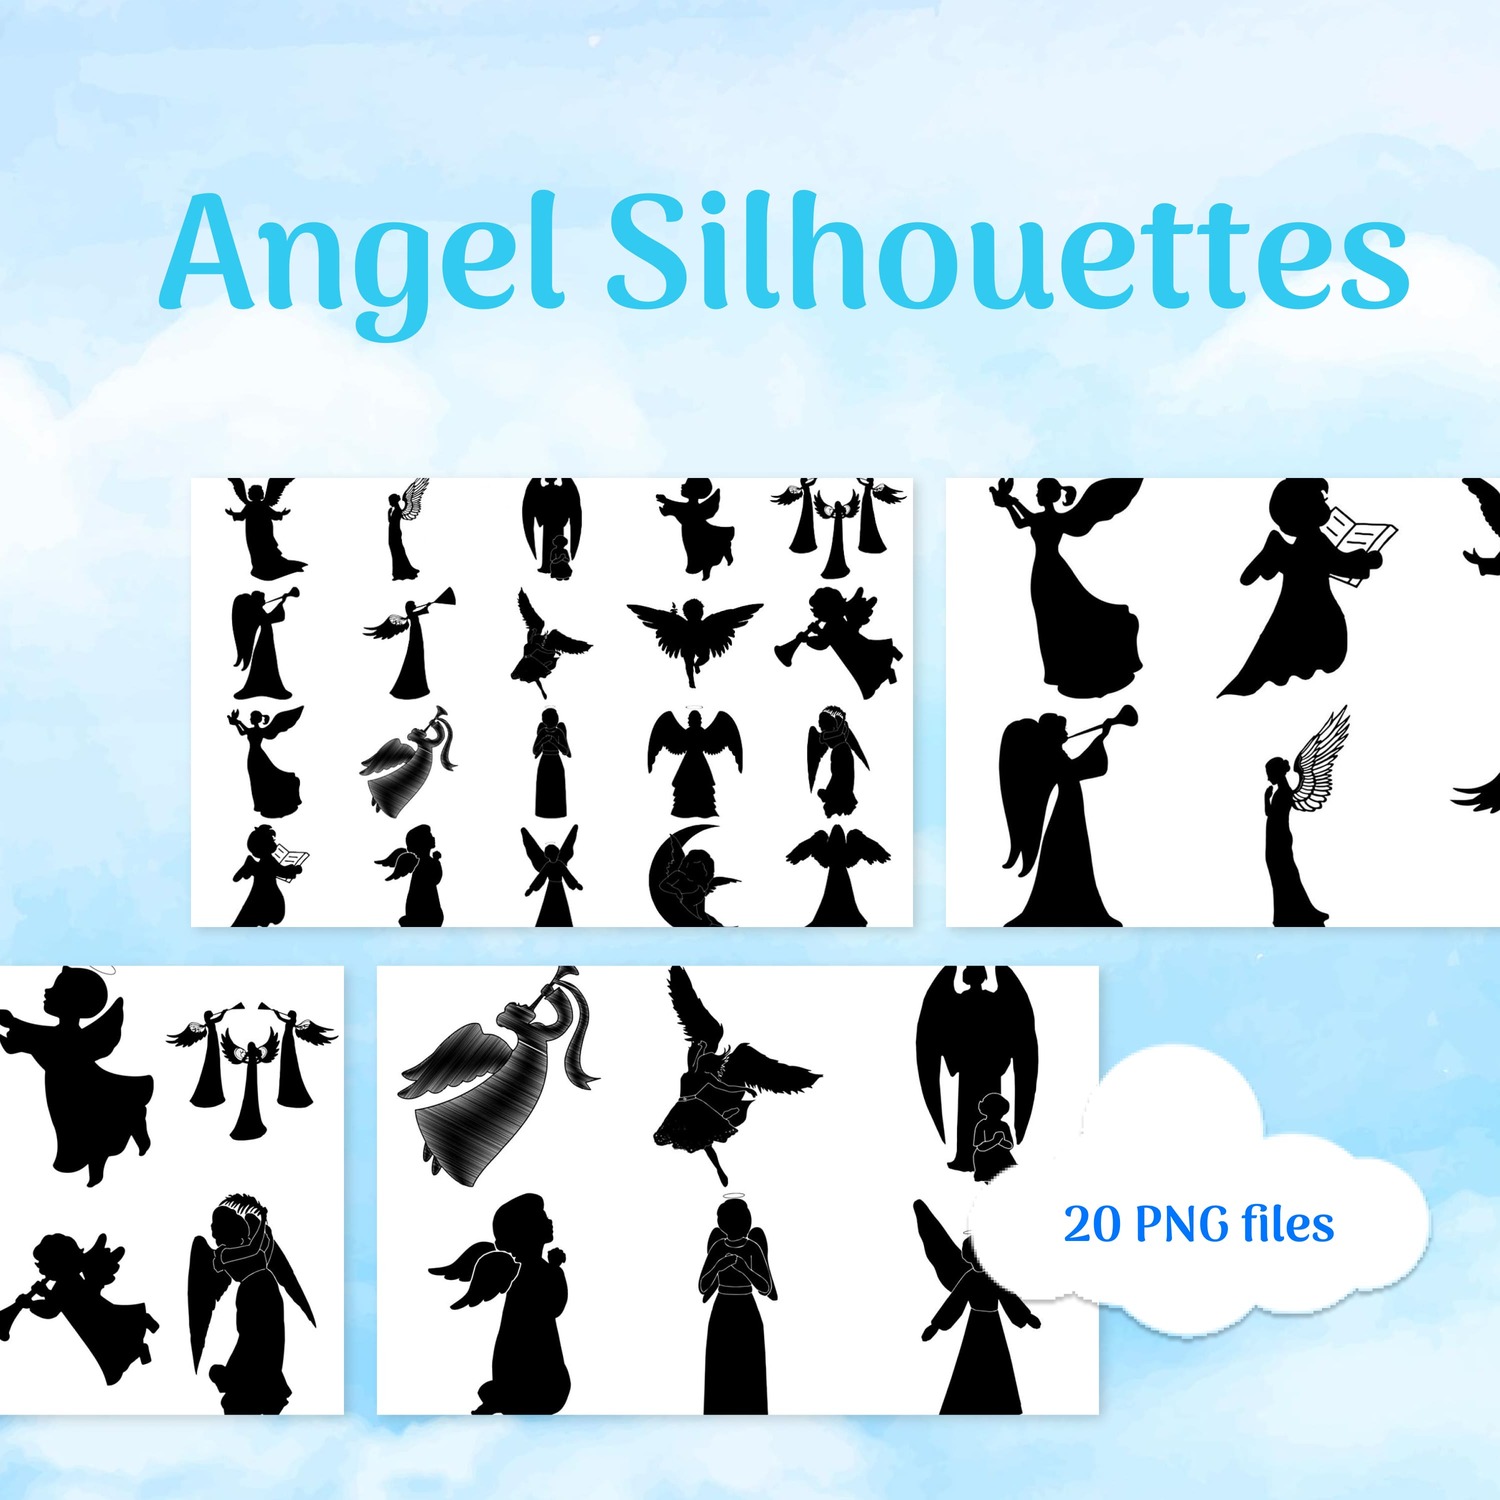 Angel Silhouettes AI EPS PNG cover image.